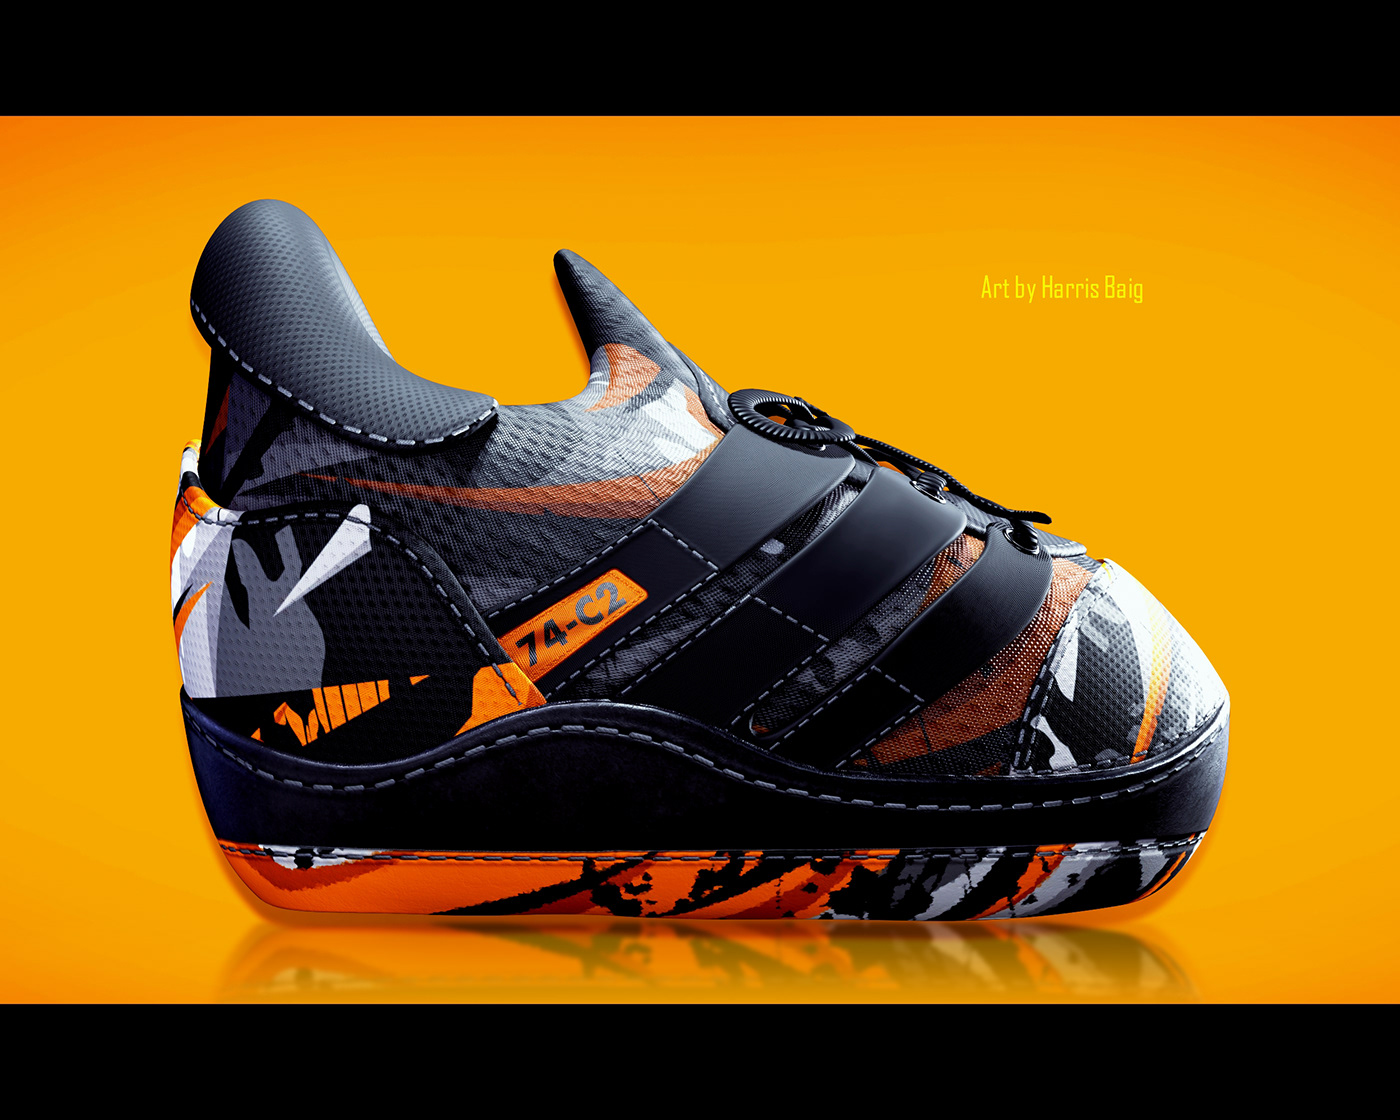 3D 3d modeling 3d modeling and rendering 3ds max digital3d haris haris baig Nike shoes Zbrush